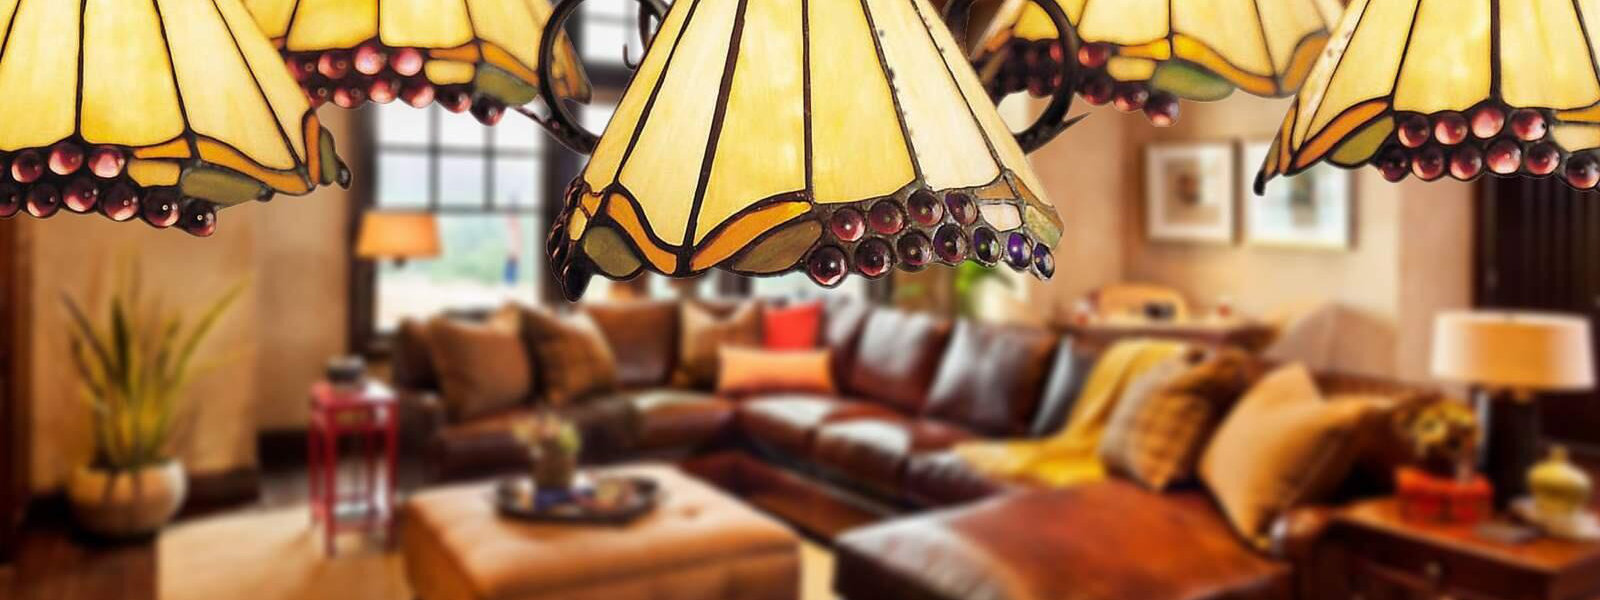 5 Bulbs Scallop Pendant Lamp Colonial Gold Frosted Glass Chandelier Light  Fixture for Study Room